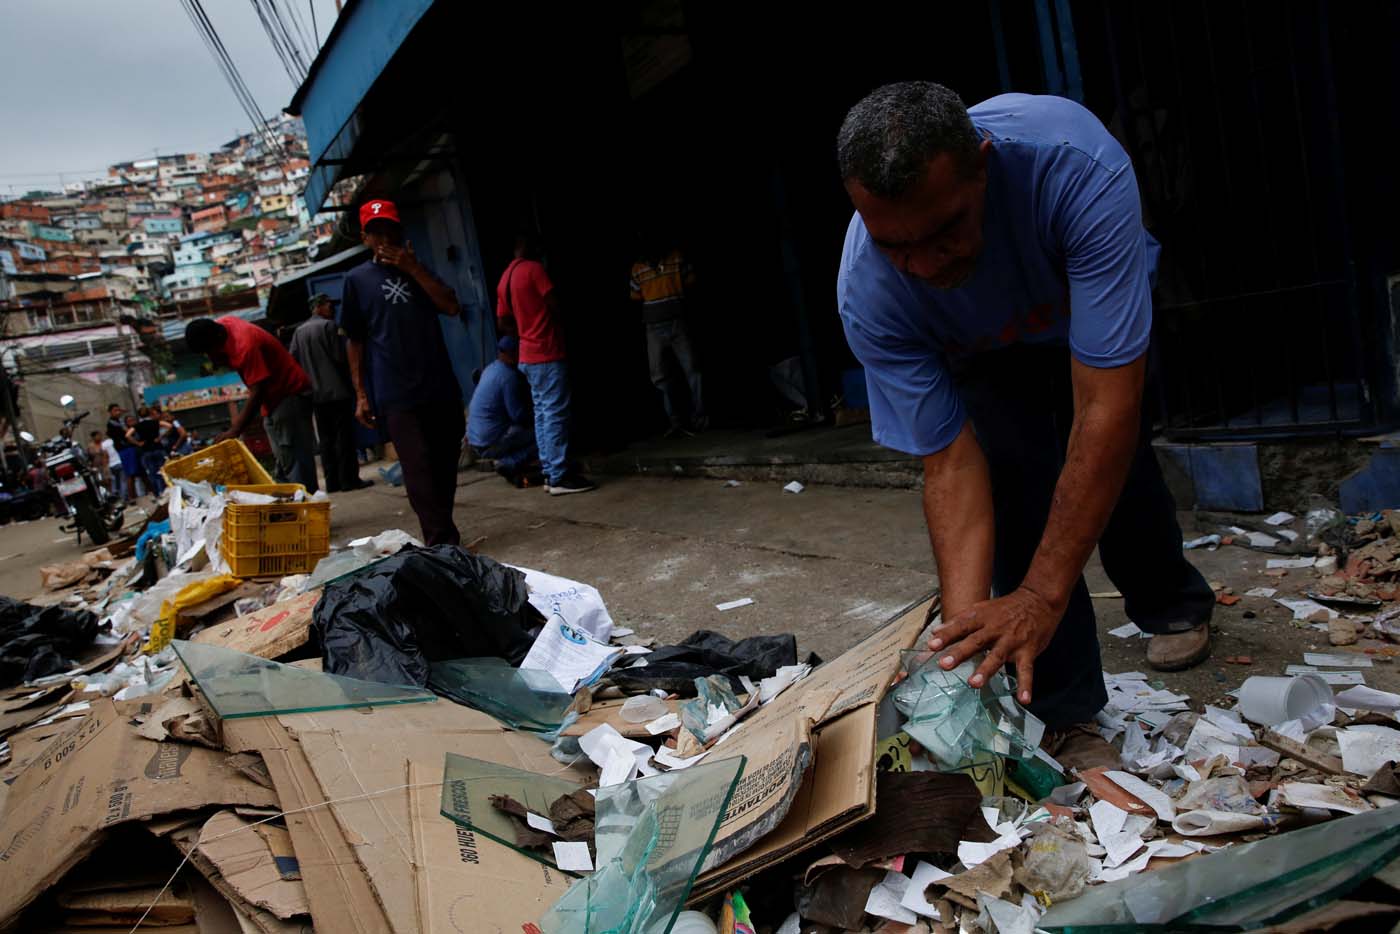 A man discards broken glass, while he tries to cleans his stall at a commercial street, after it was looted in Caracas, Venezuela April 21, 2017. REUTERS/Carlos Garcia Rawlins